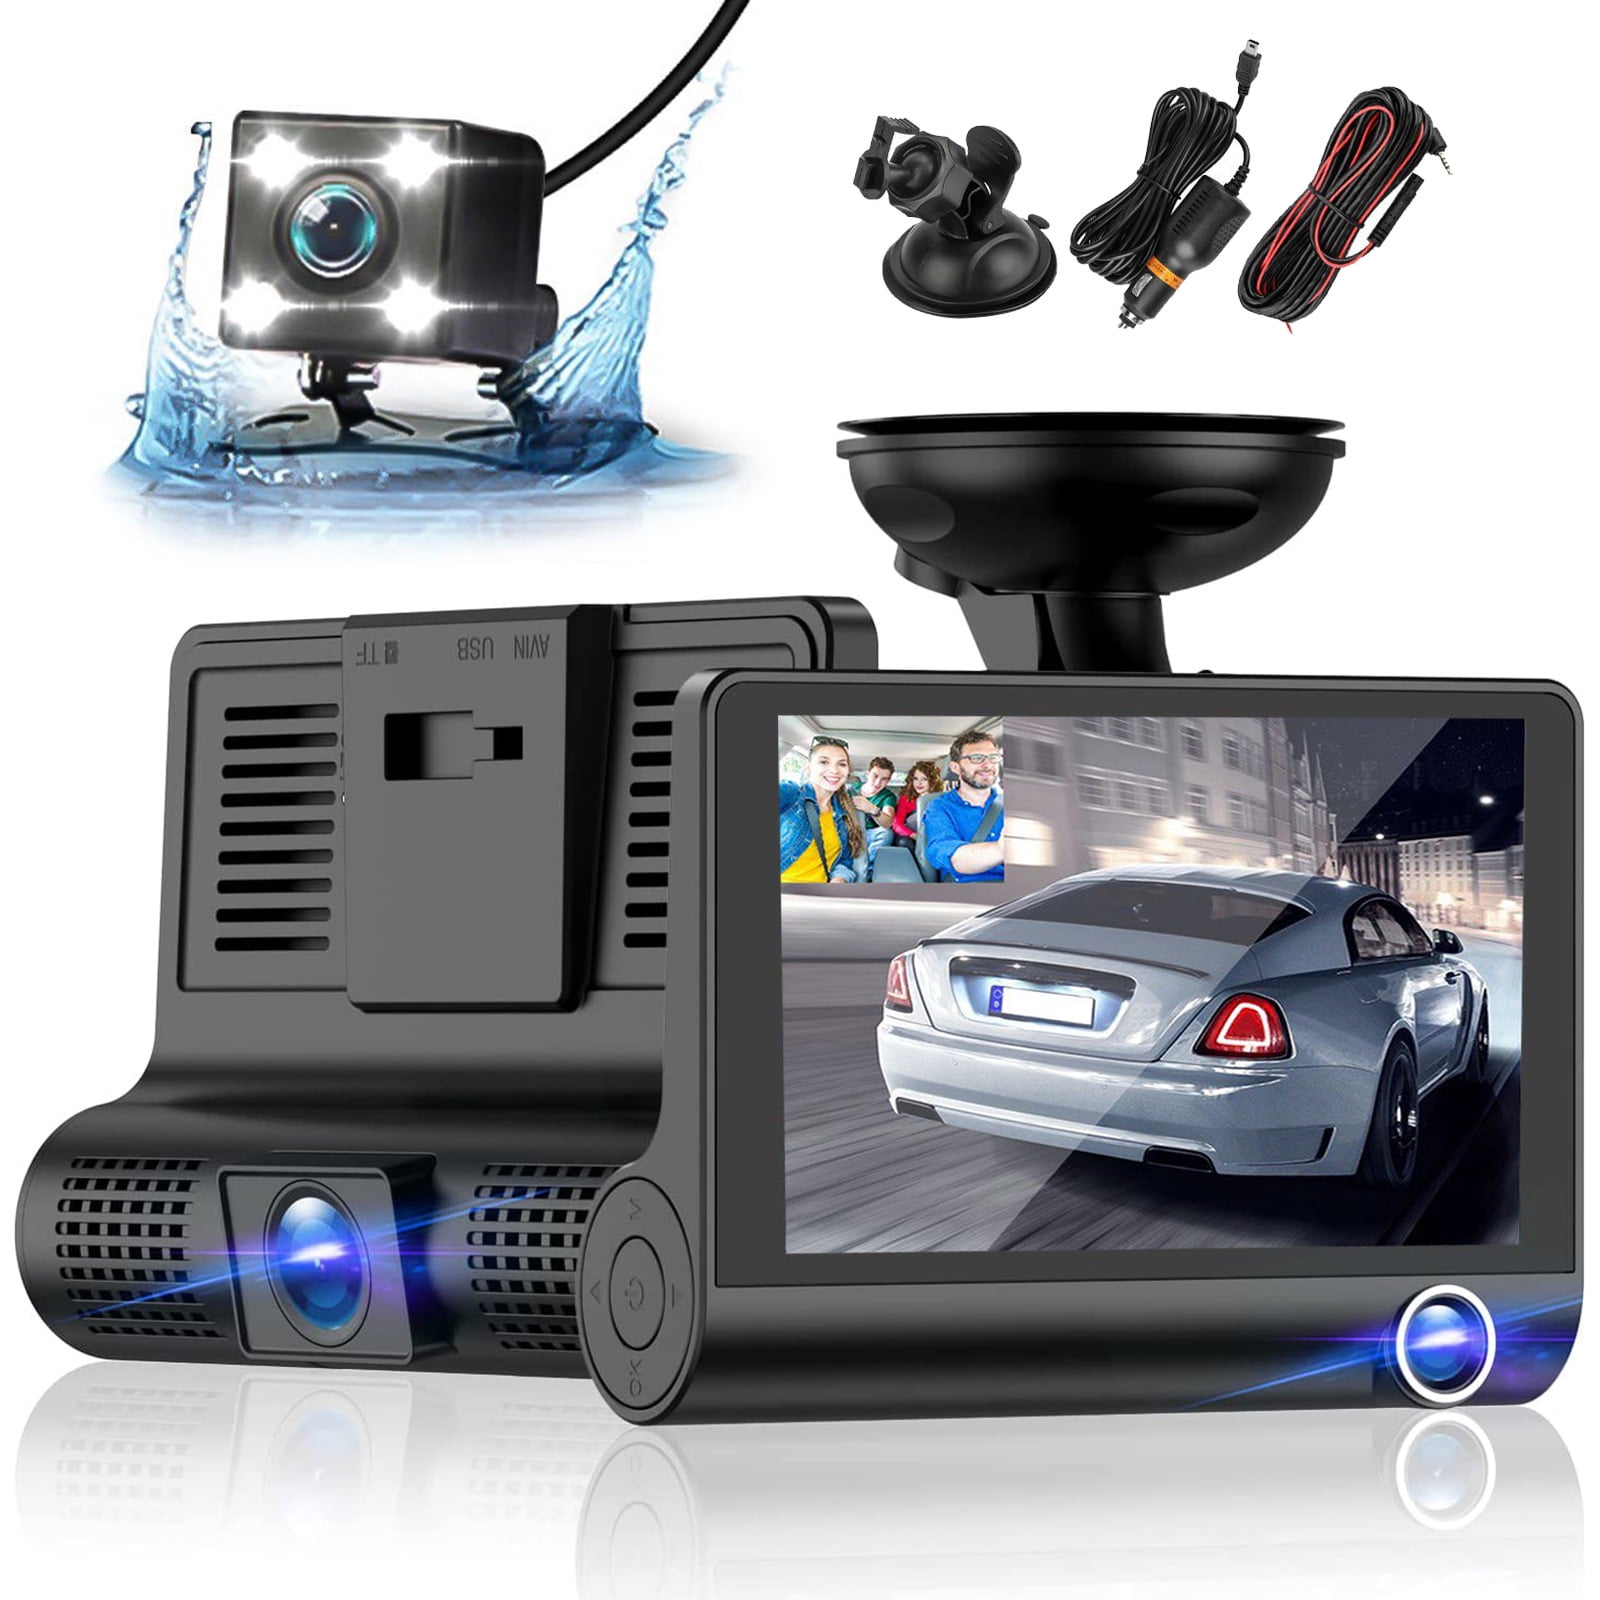 TSV Dash Cam for 1080P Full HD Dash 3 Channel Dash Cam Night Vision, Driving Recorder with 4inch LCD Display, Parking Mode, G-Sensor, Loop Recording, WDR Walmart.com